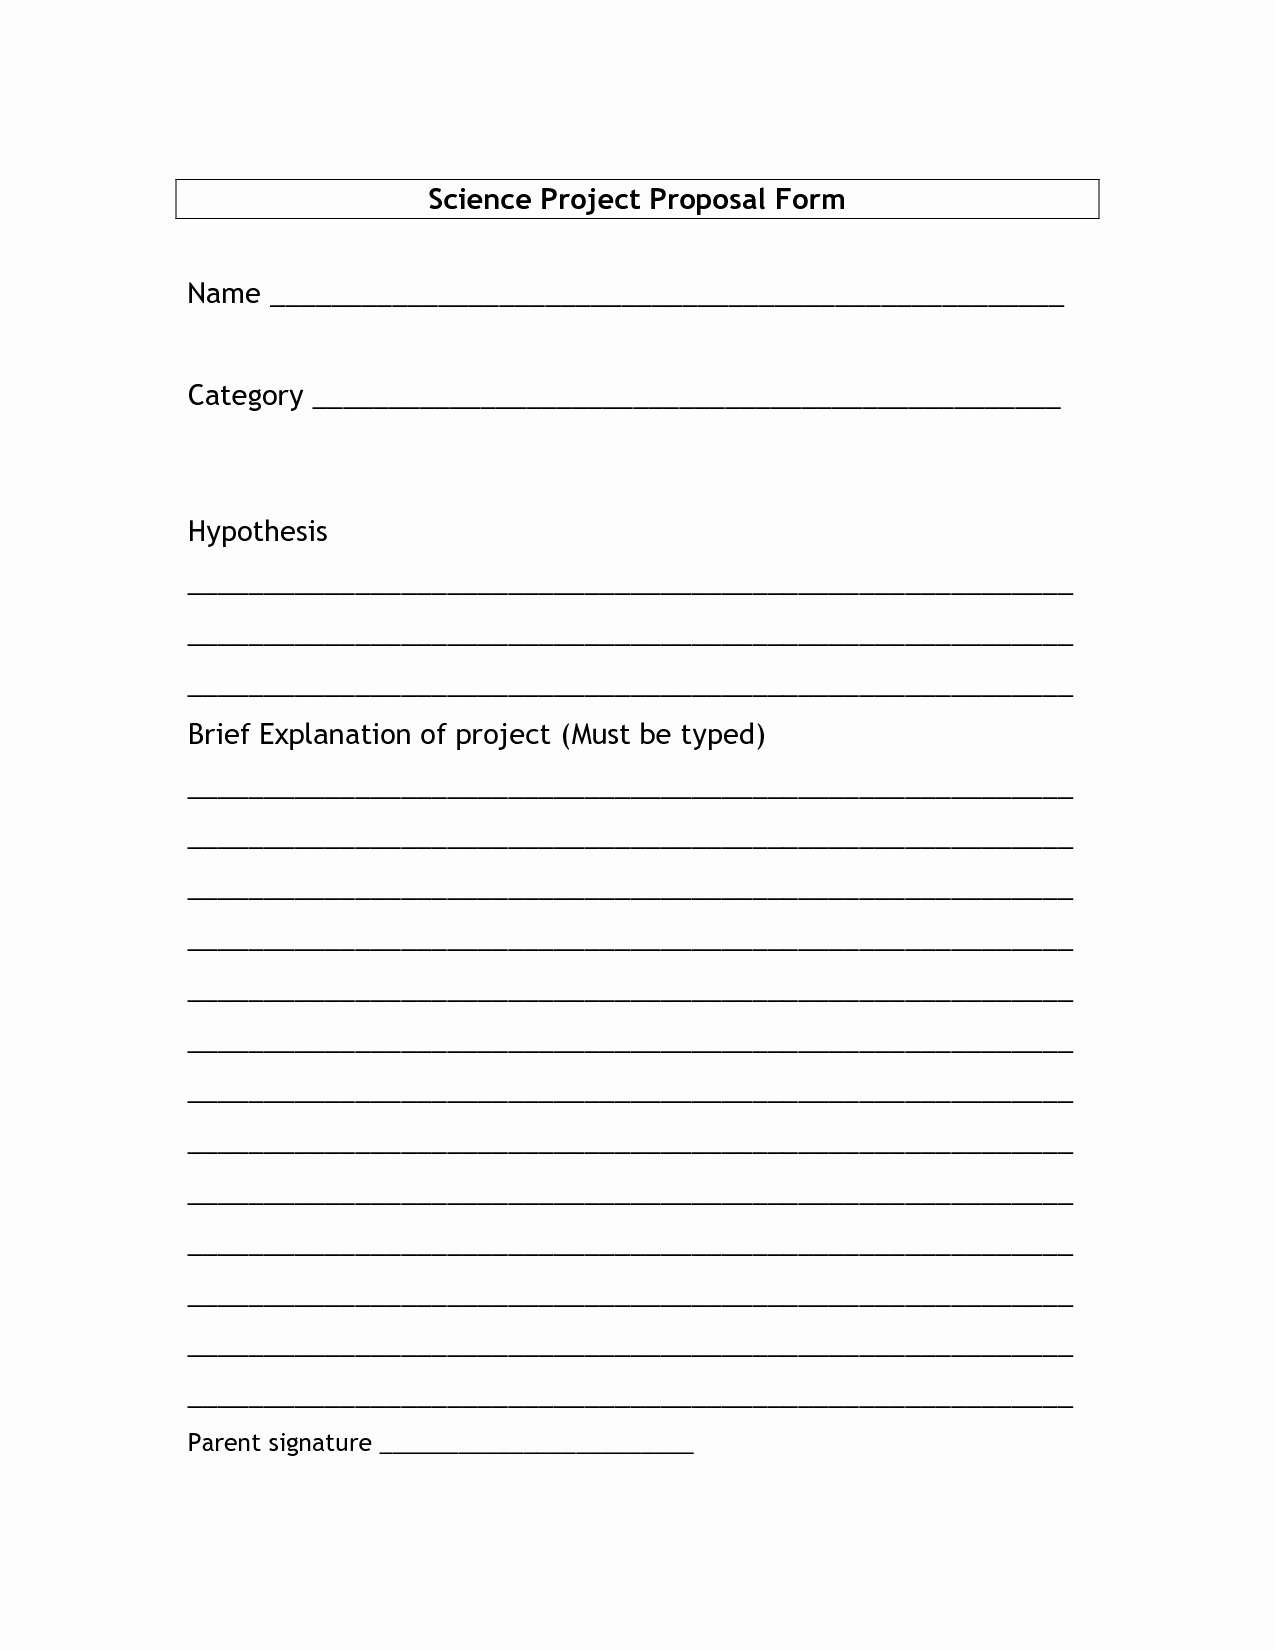 Science Fair Proposal Sheet Lovely Science Fair Project forms 13 Quick Tips Regarding Science